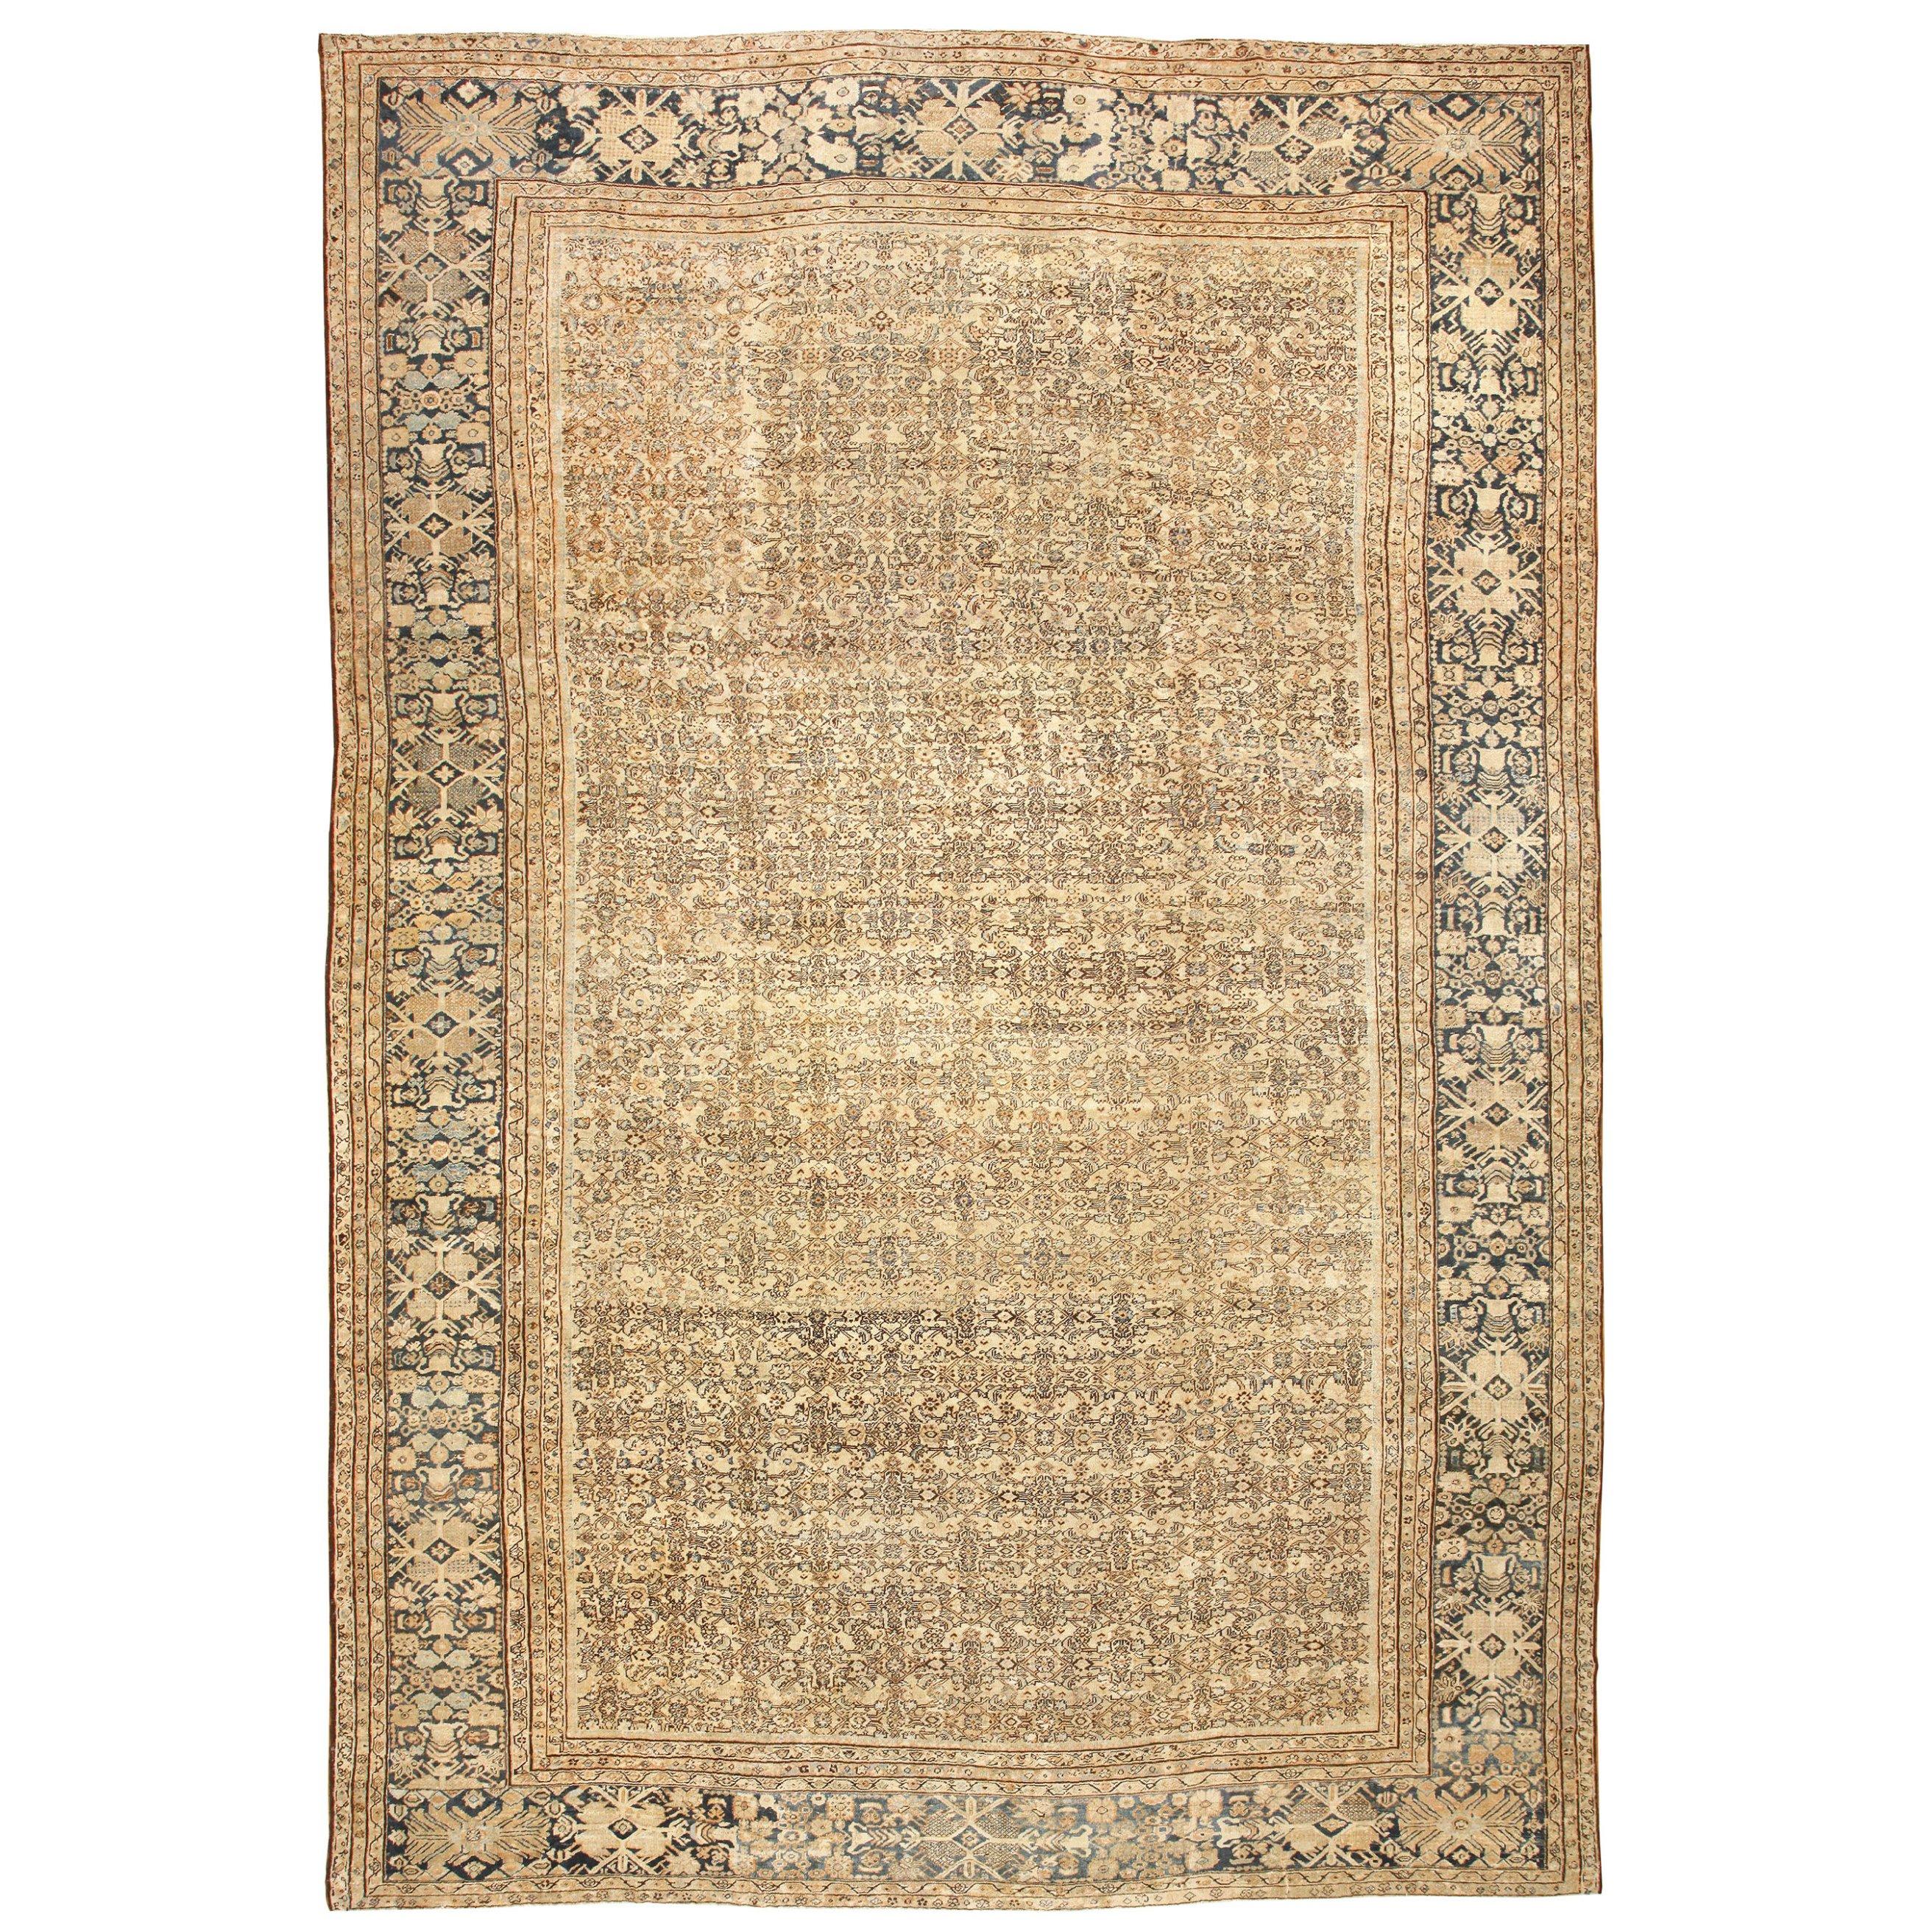 Large Oversize Antique Persian Sultanabad Rug. Size: 14 ft 6 in x 22 ft